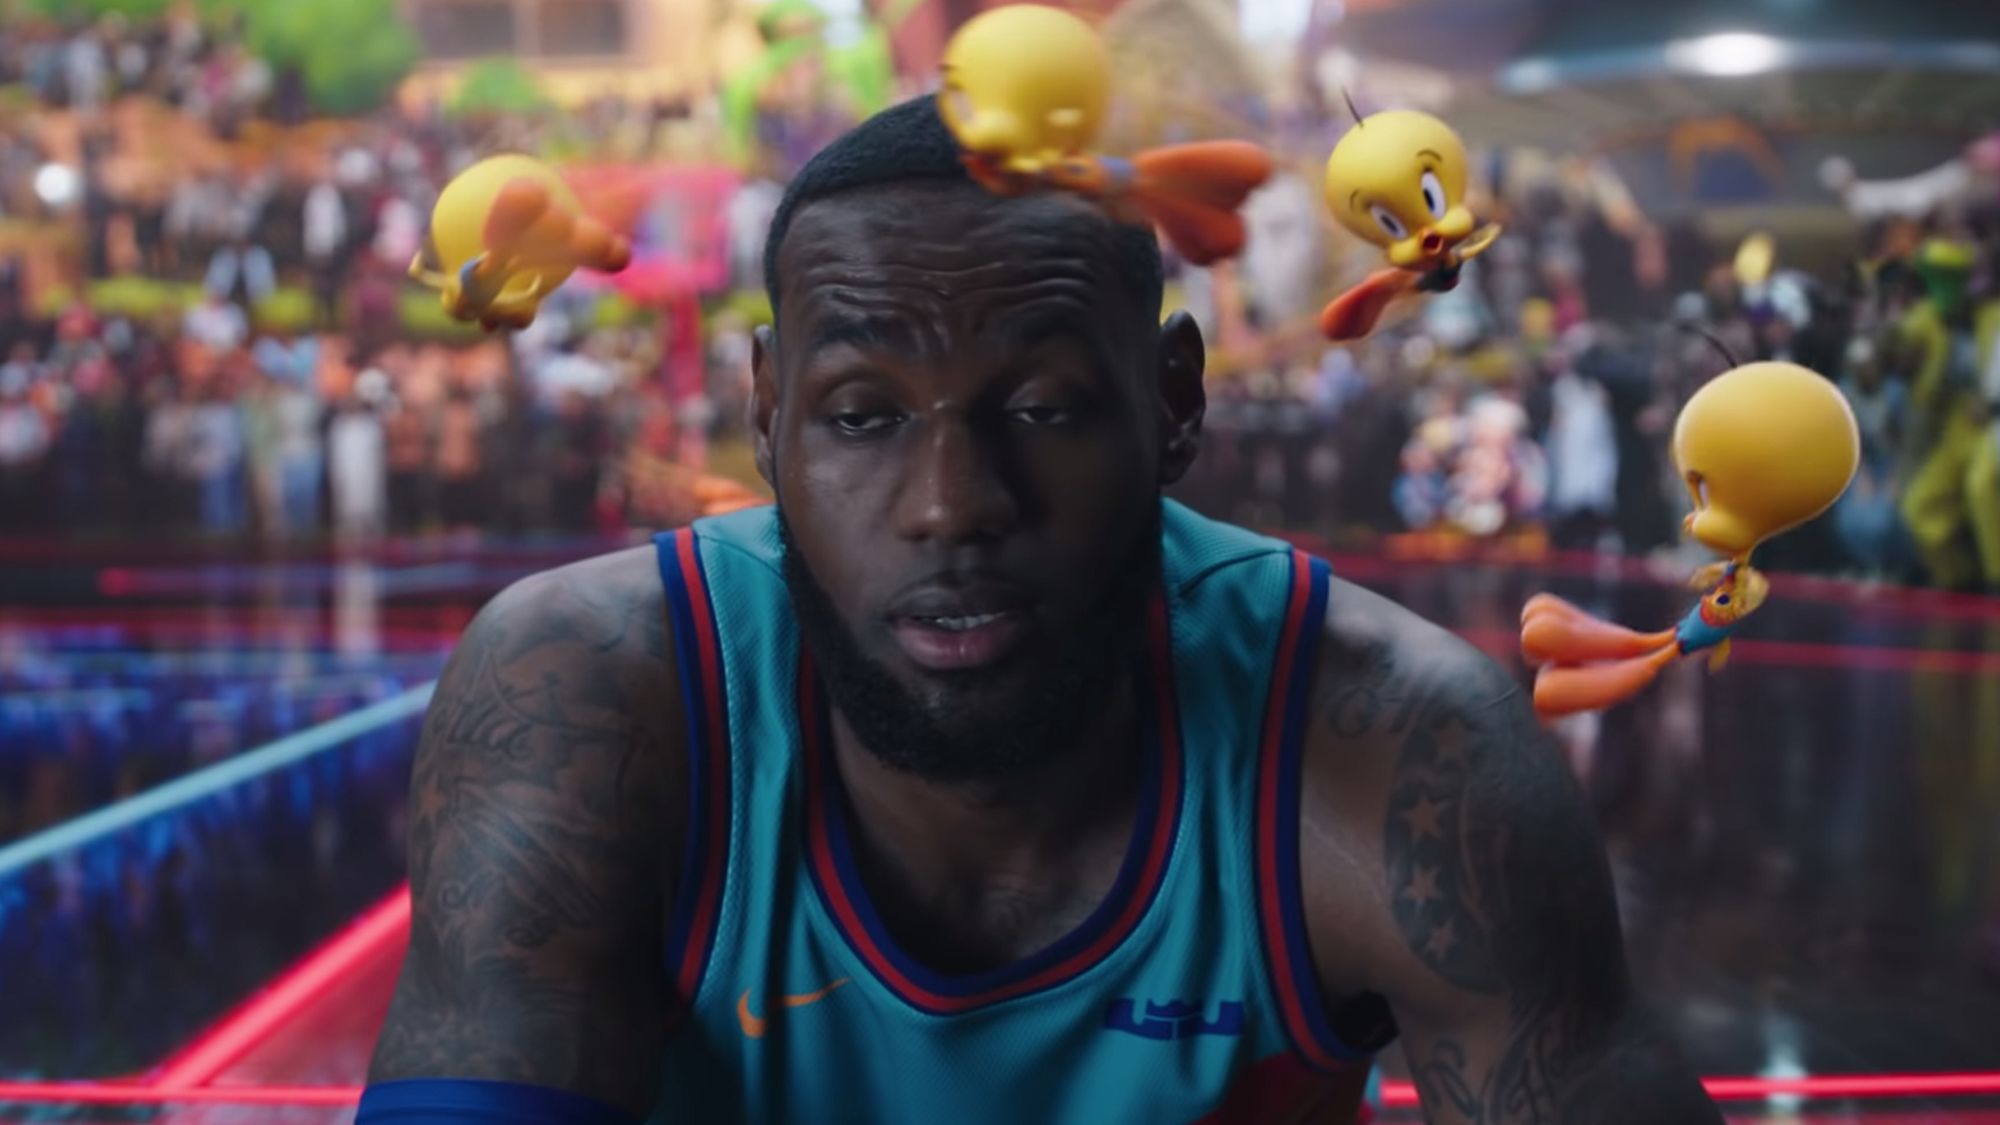 Is LeBron James's Wife in 'Space Jam' 2? - LeBron James's Family in 'Space  Jam: A New Legacy